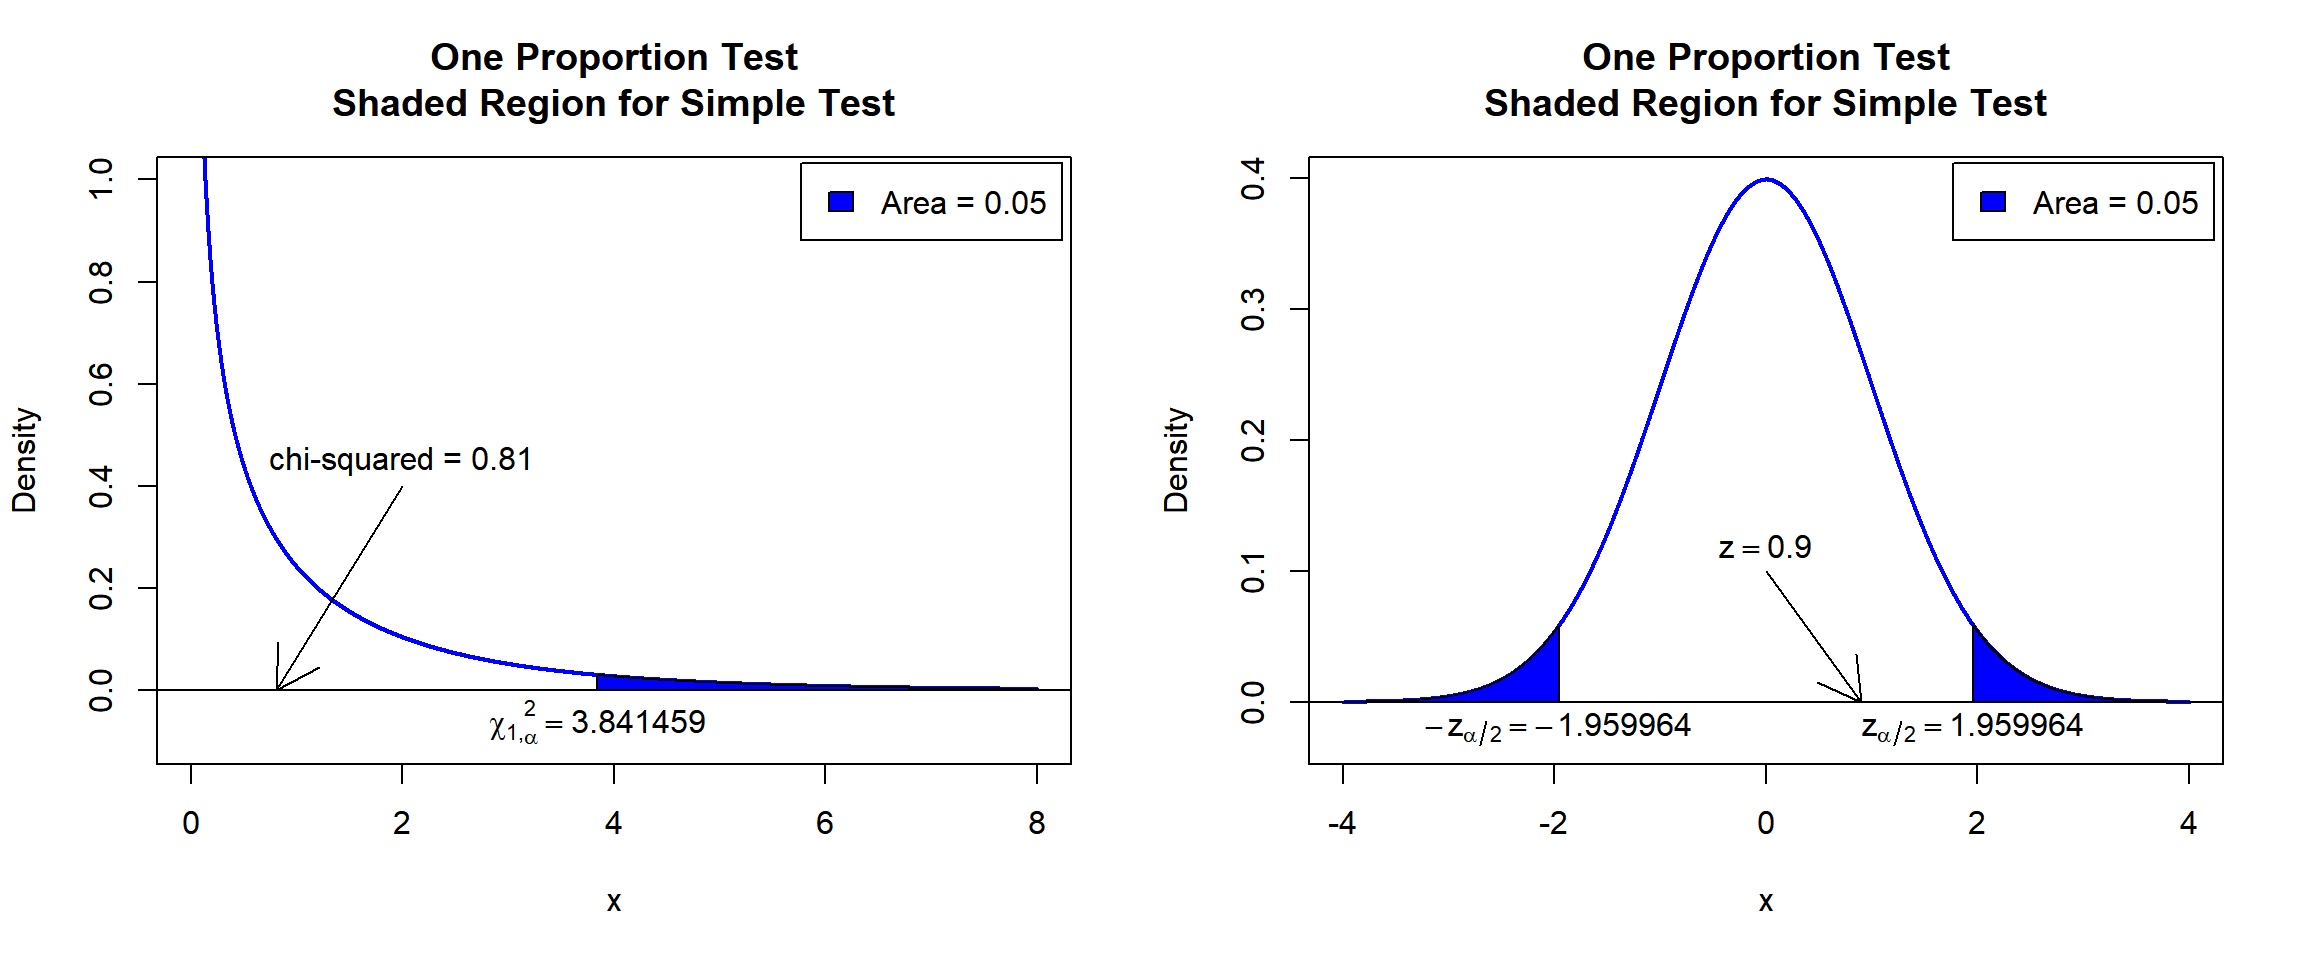 One Proportion Test Shaded Region for Simple Test in R